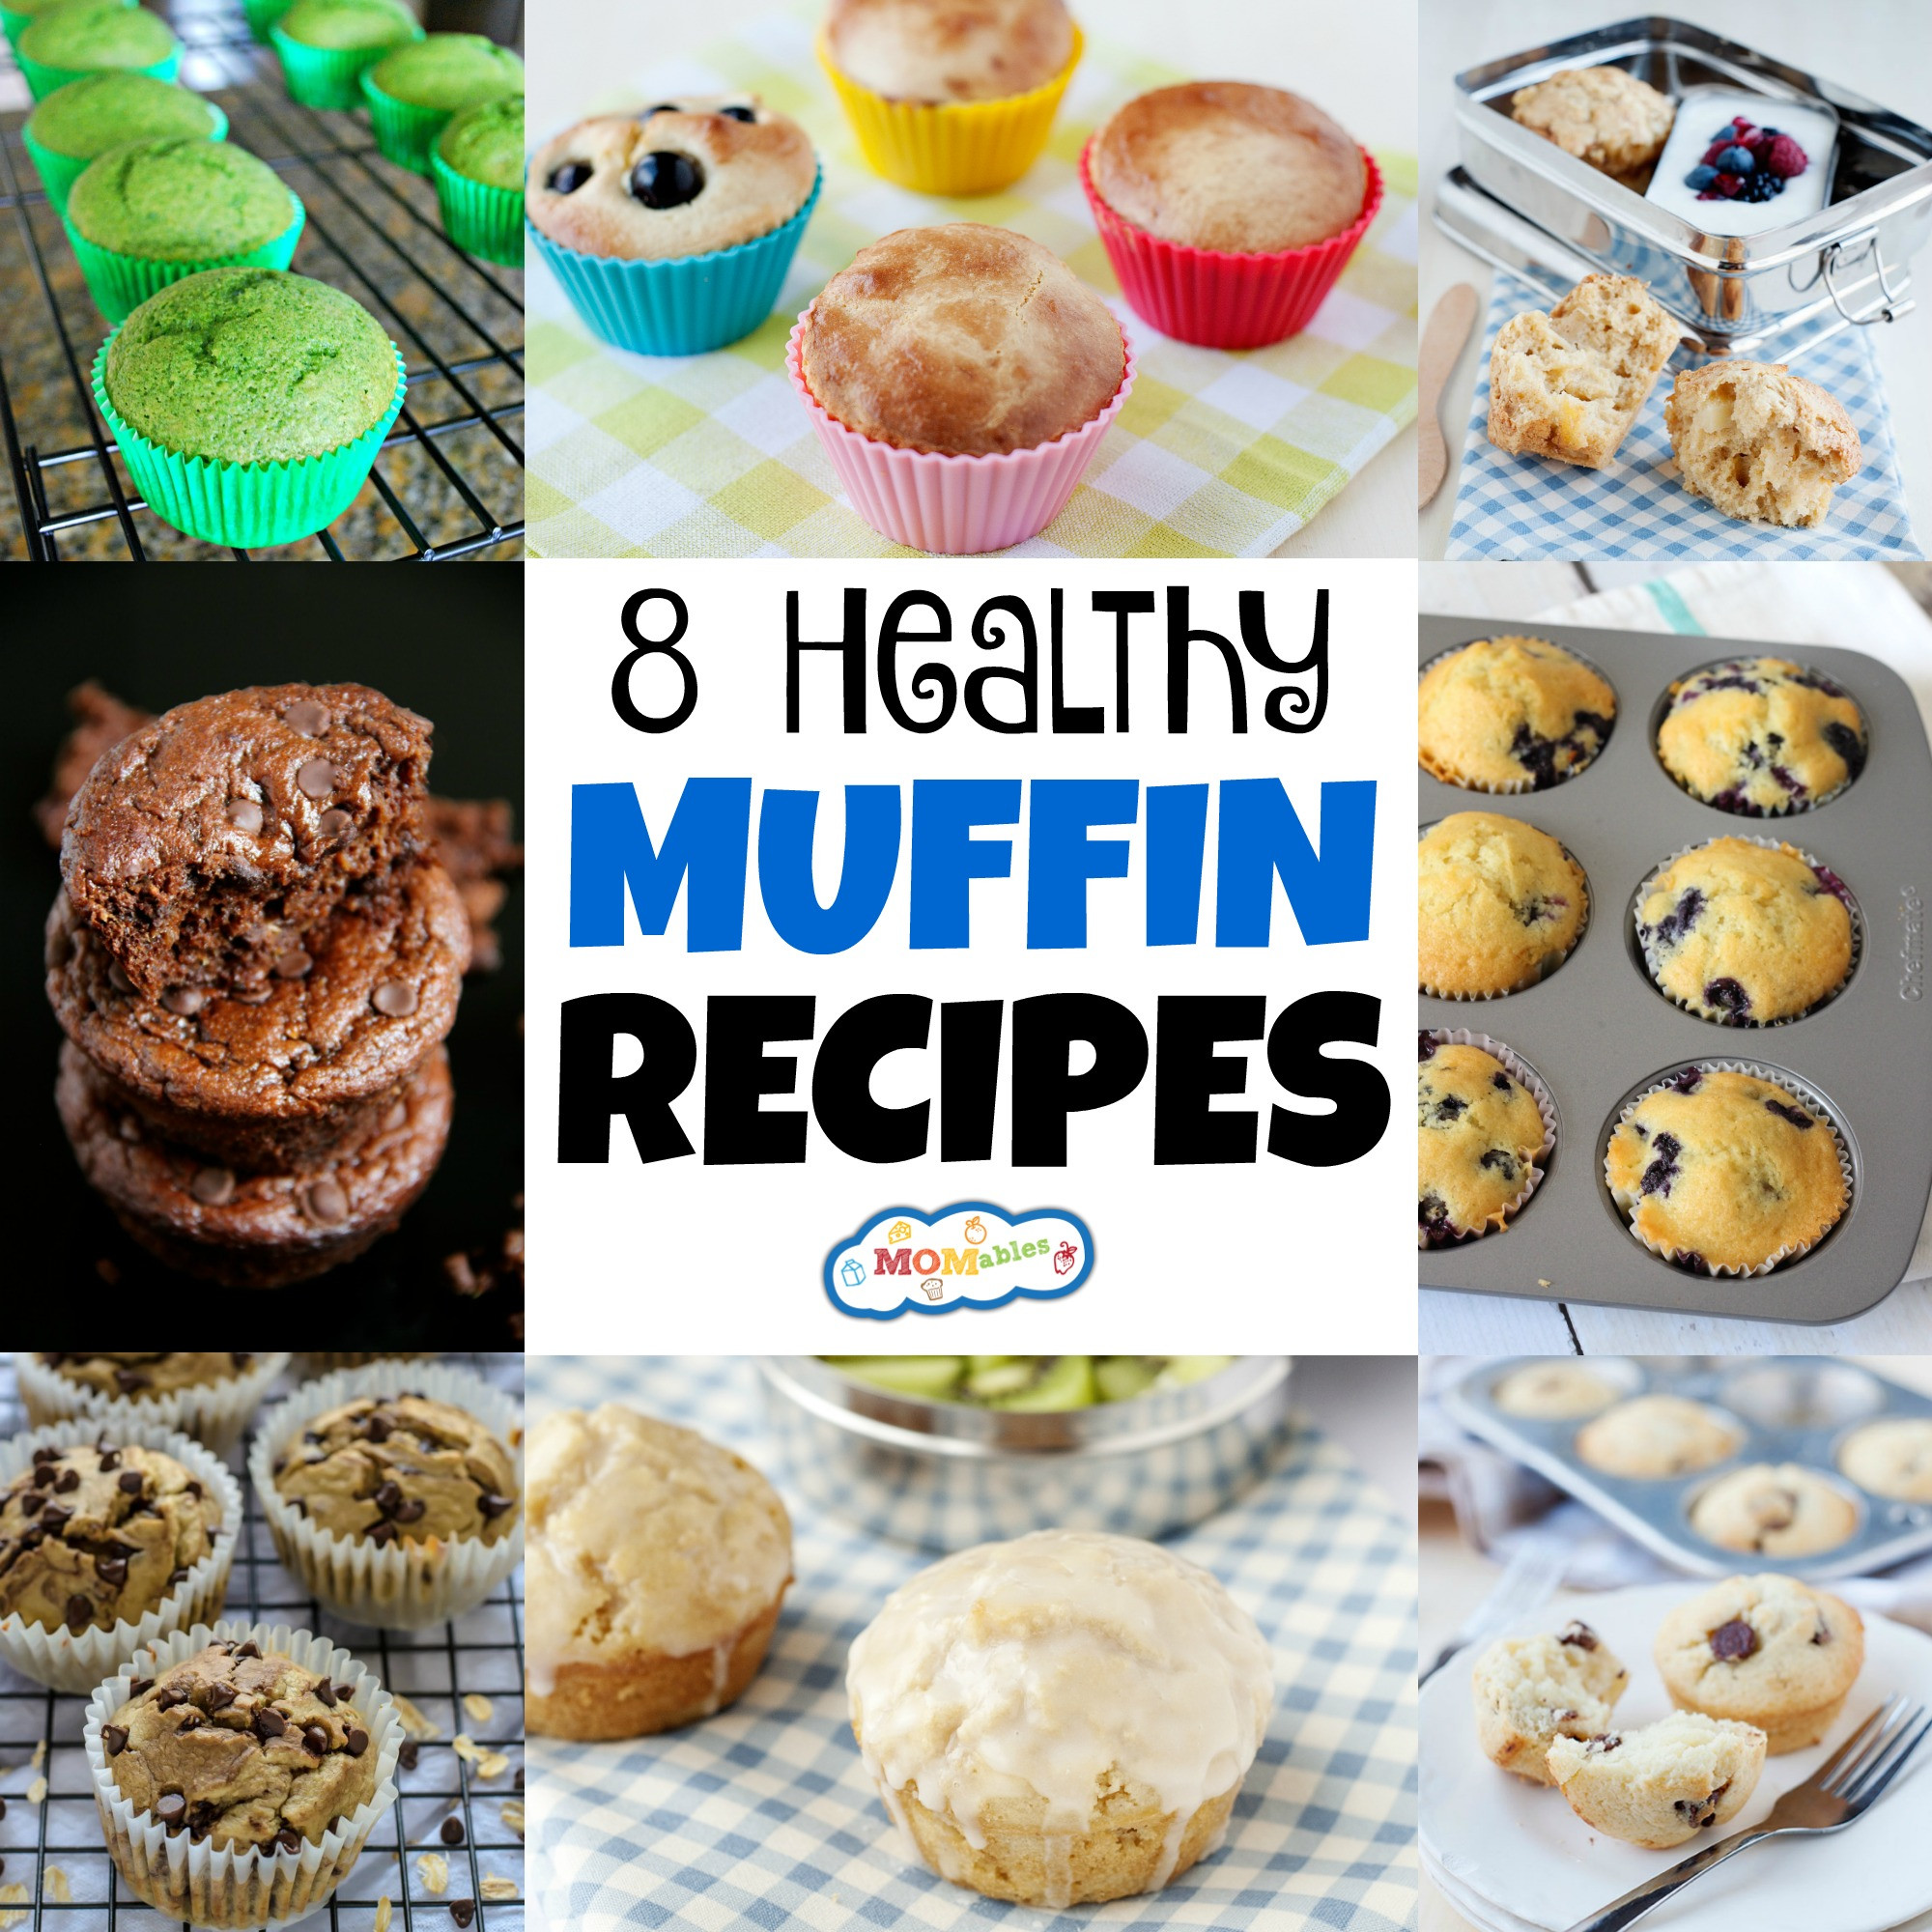 Healthy Muffins For Breakfast
 8 Healthy Muffin Recipes for Breakfast MOMables